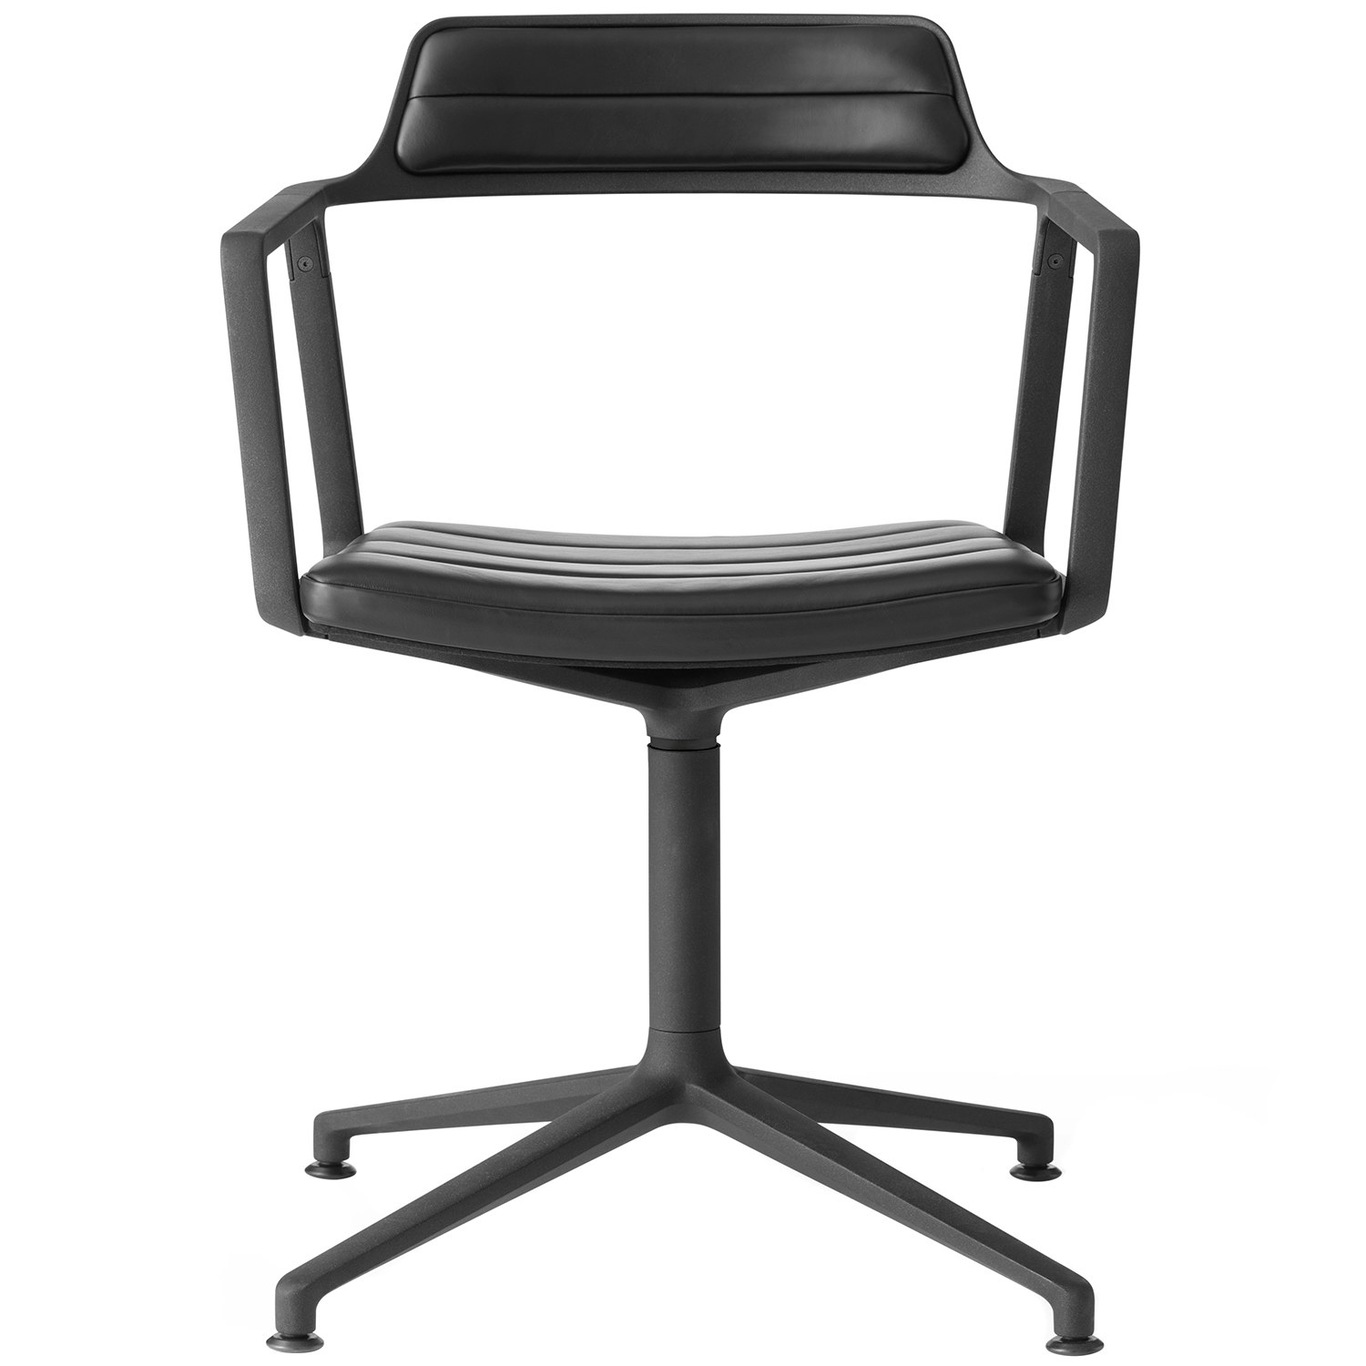 452 Swivel Chair With Feet, Powder-lacquered Aluminium / Black Leather